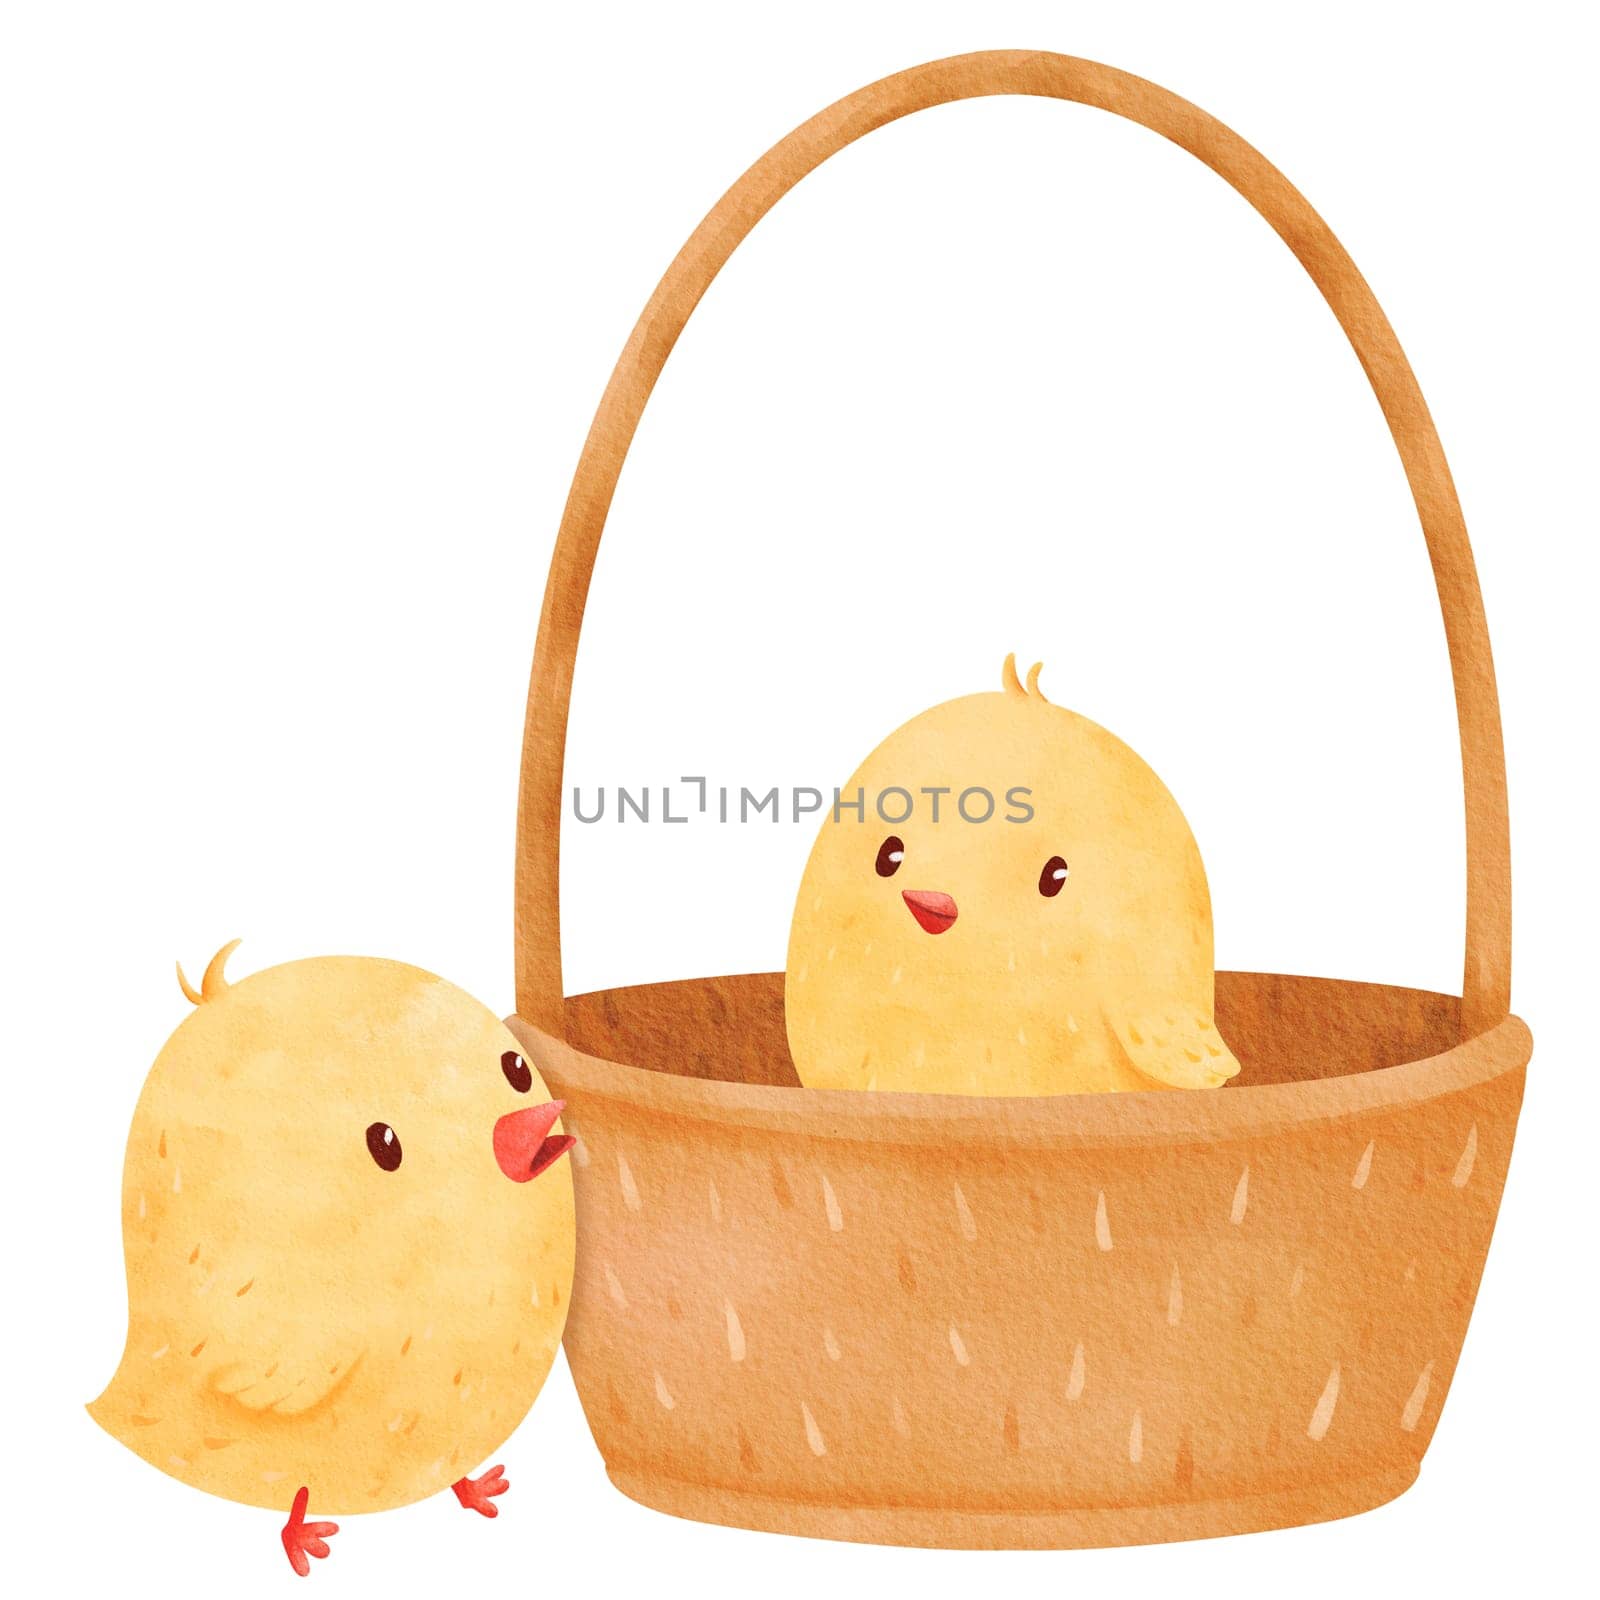 Watercolor composition showcasing two lively chicks. one frolicking inside a basket, the other outside. Cartoon-style illustration capturing the playful spirit of small yellow birds. card and print.